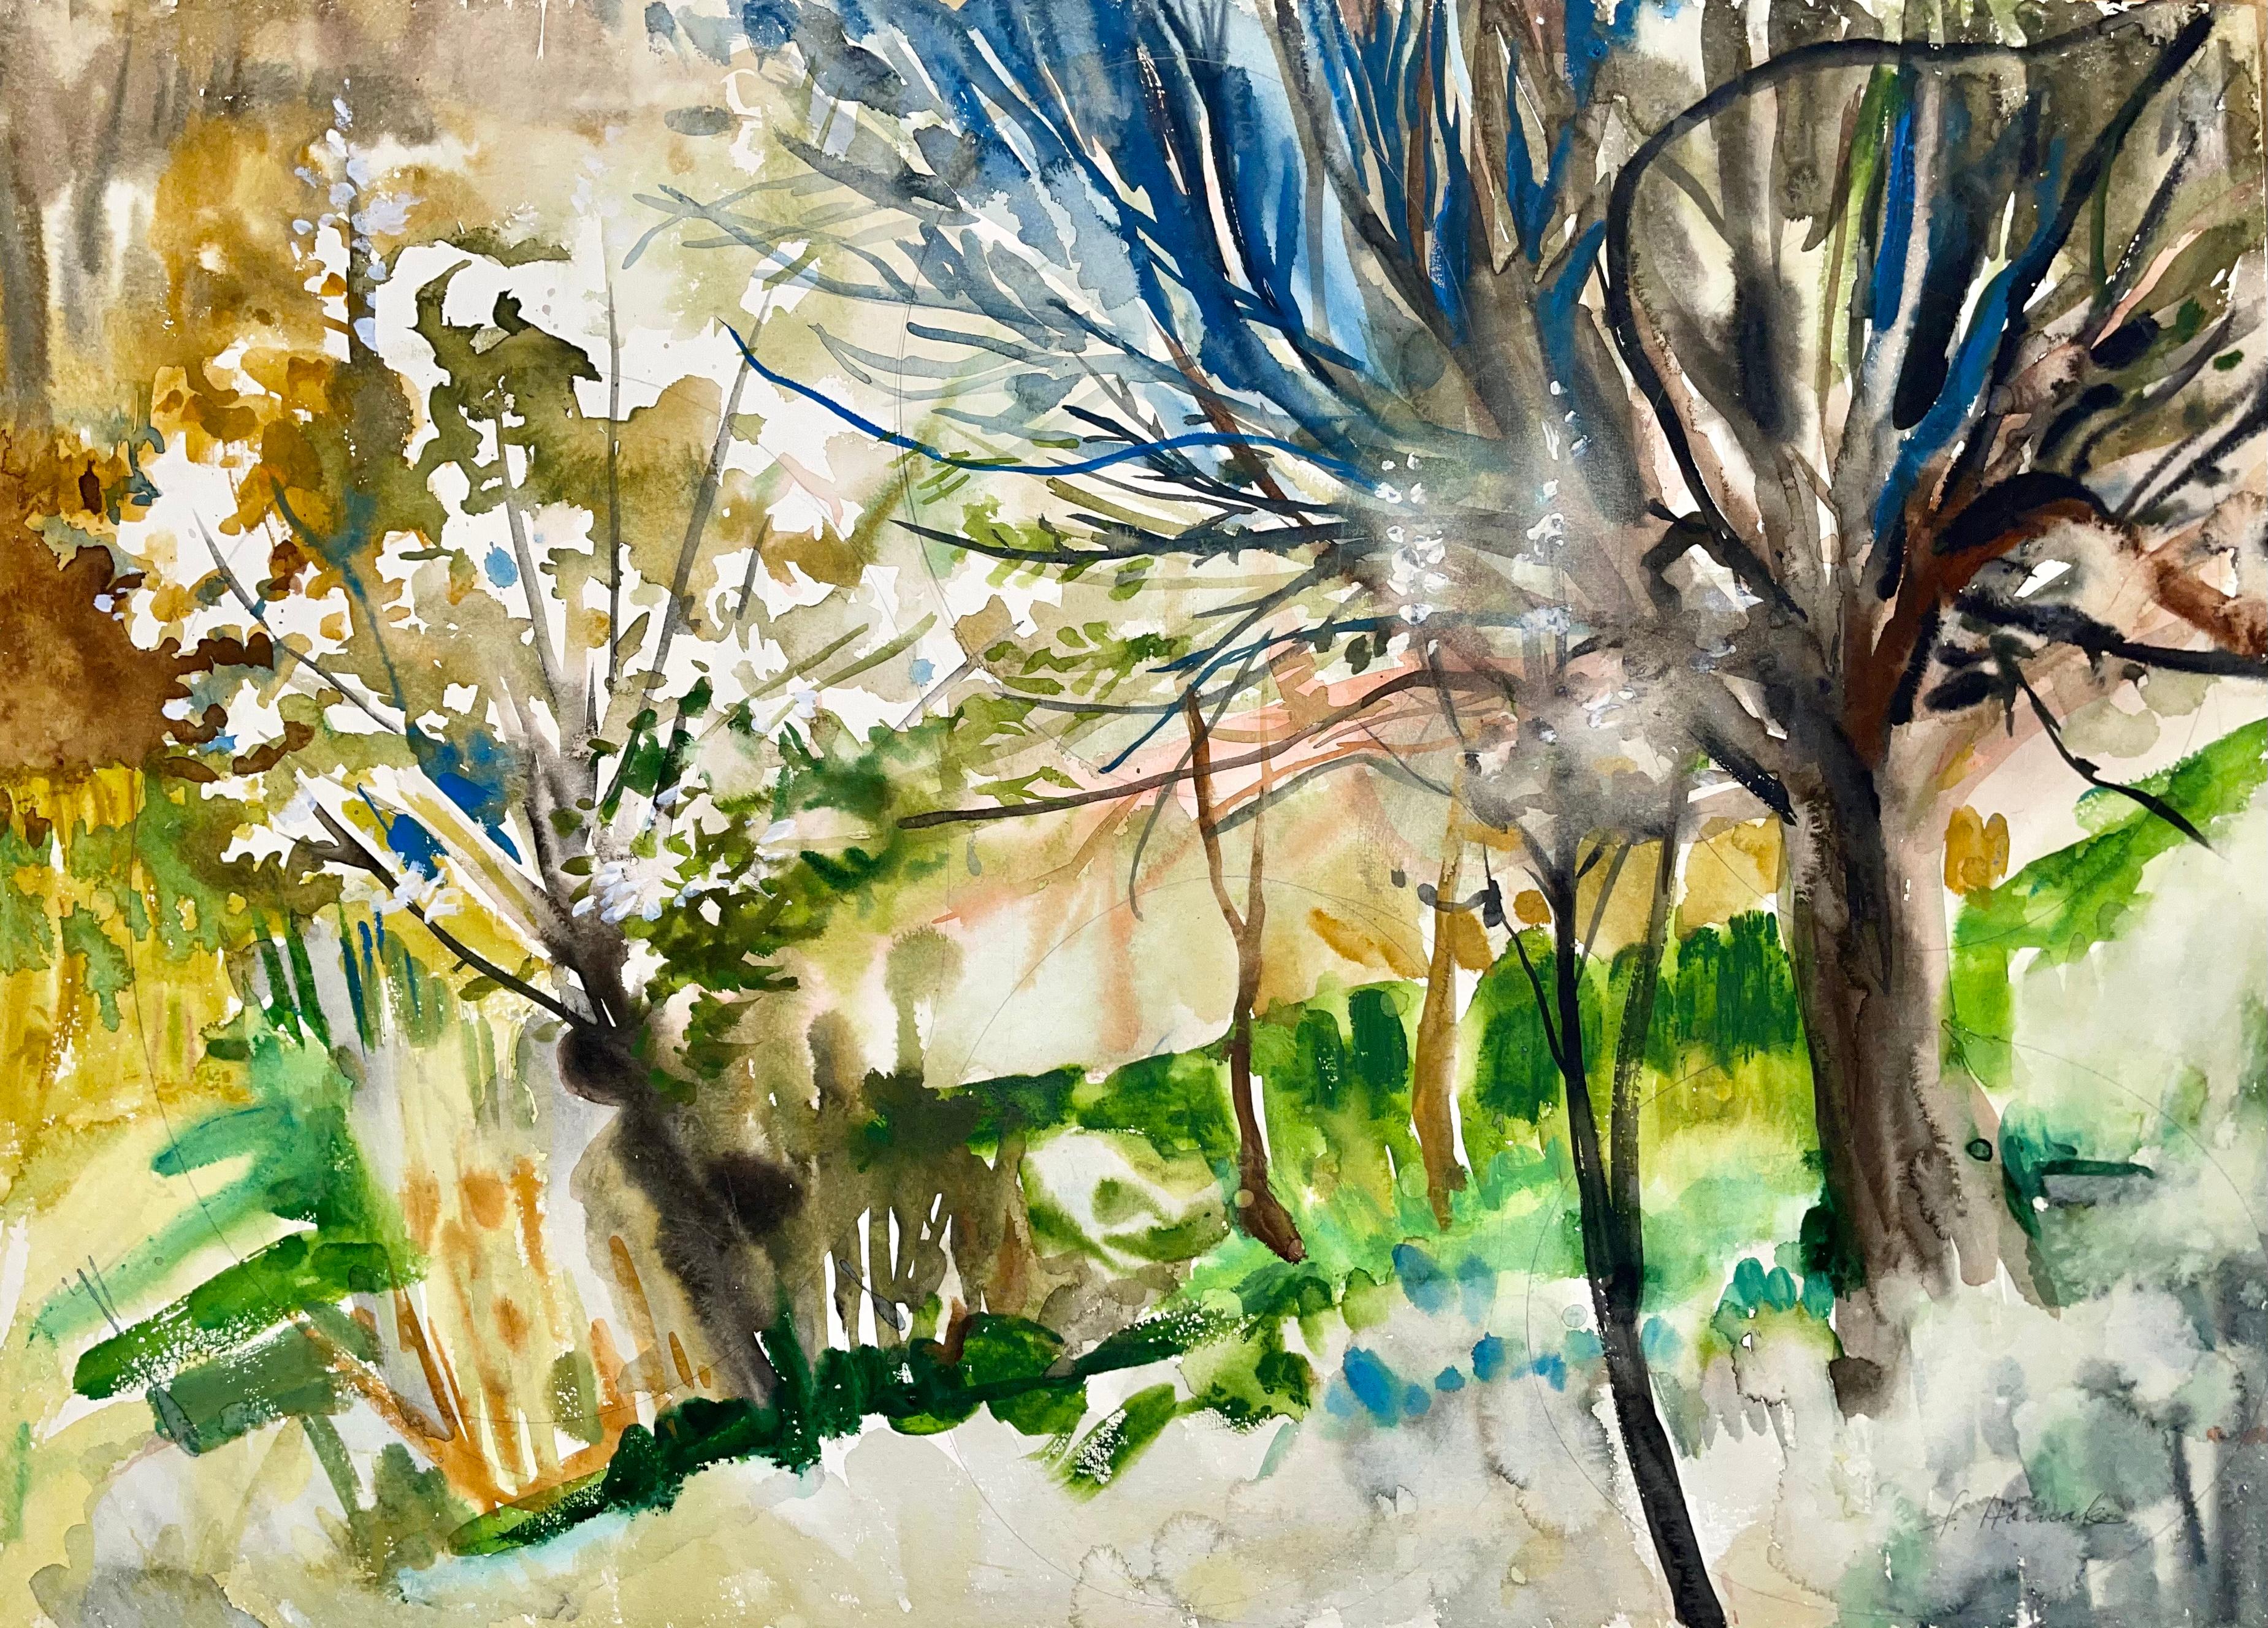 Untitled (Abstract Landscape with Flowering Tree)